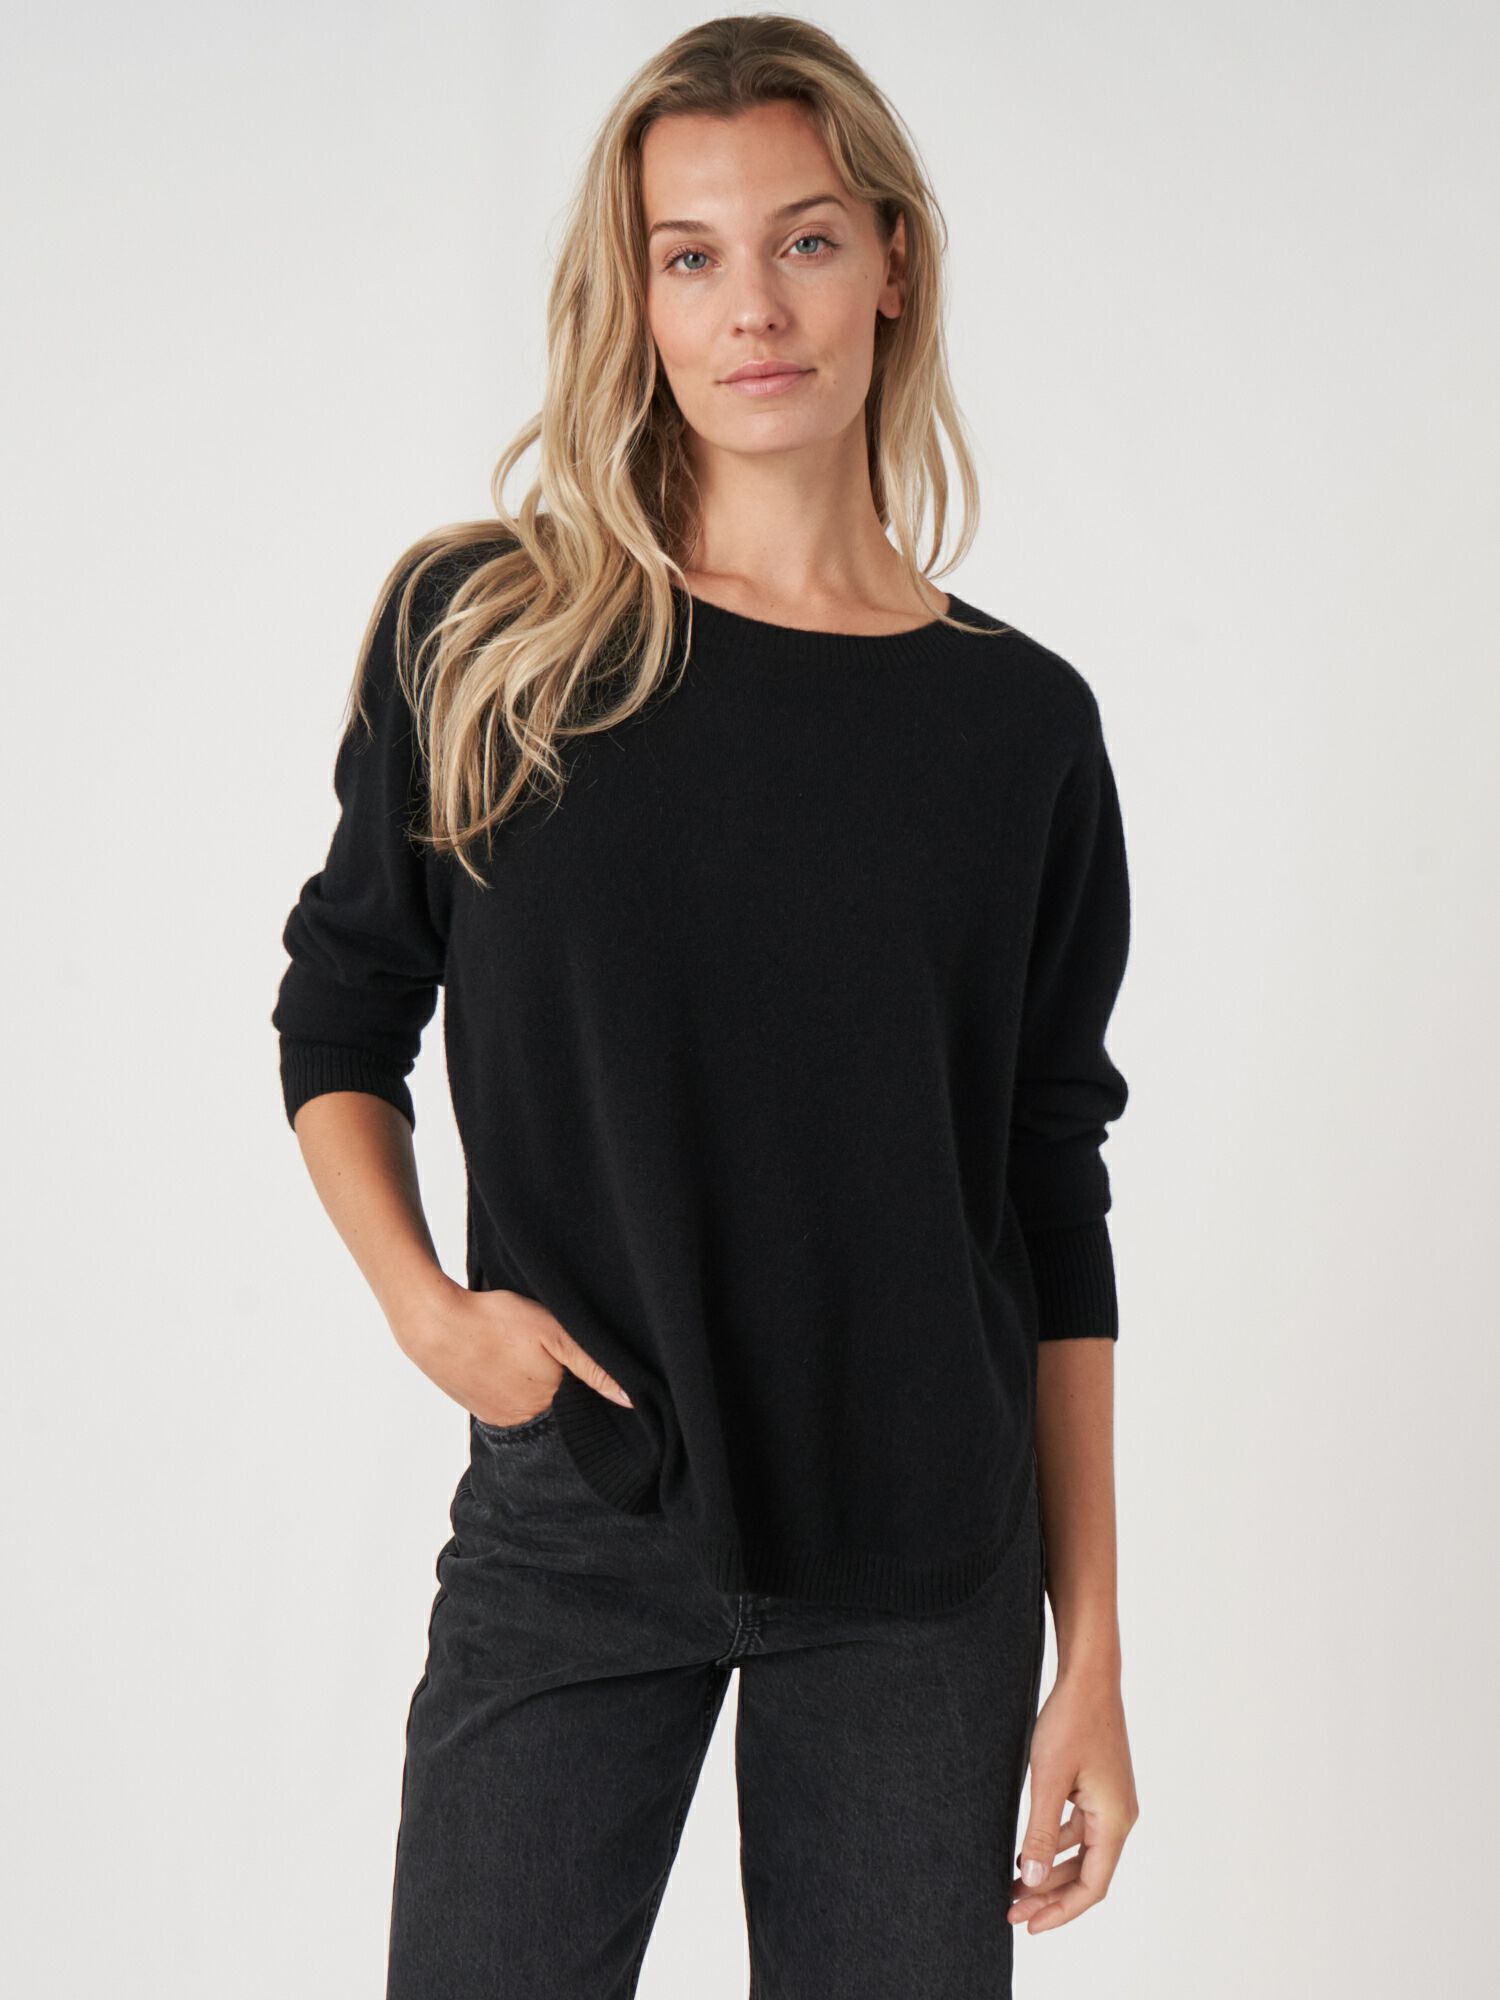 REPEAT cashmere Cashmere boothalstrui met ronde zoom